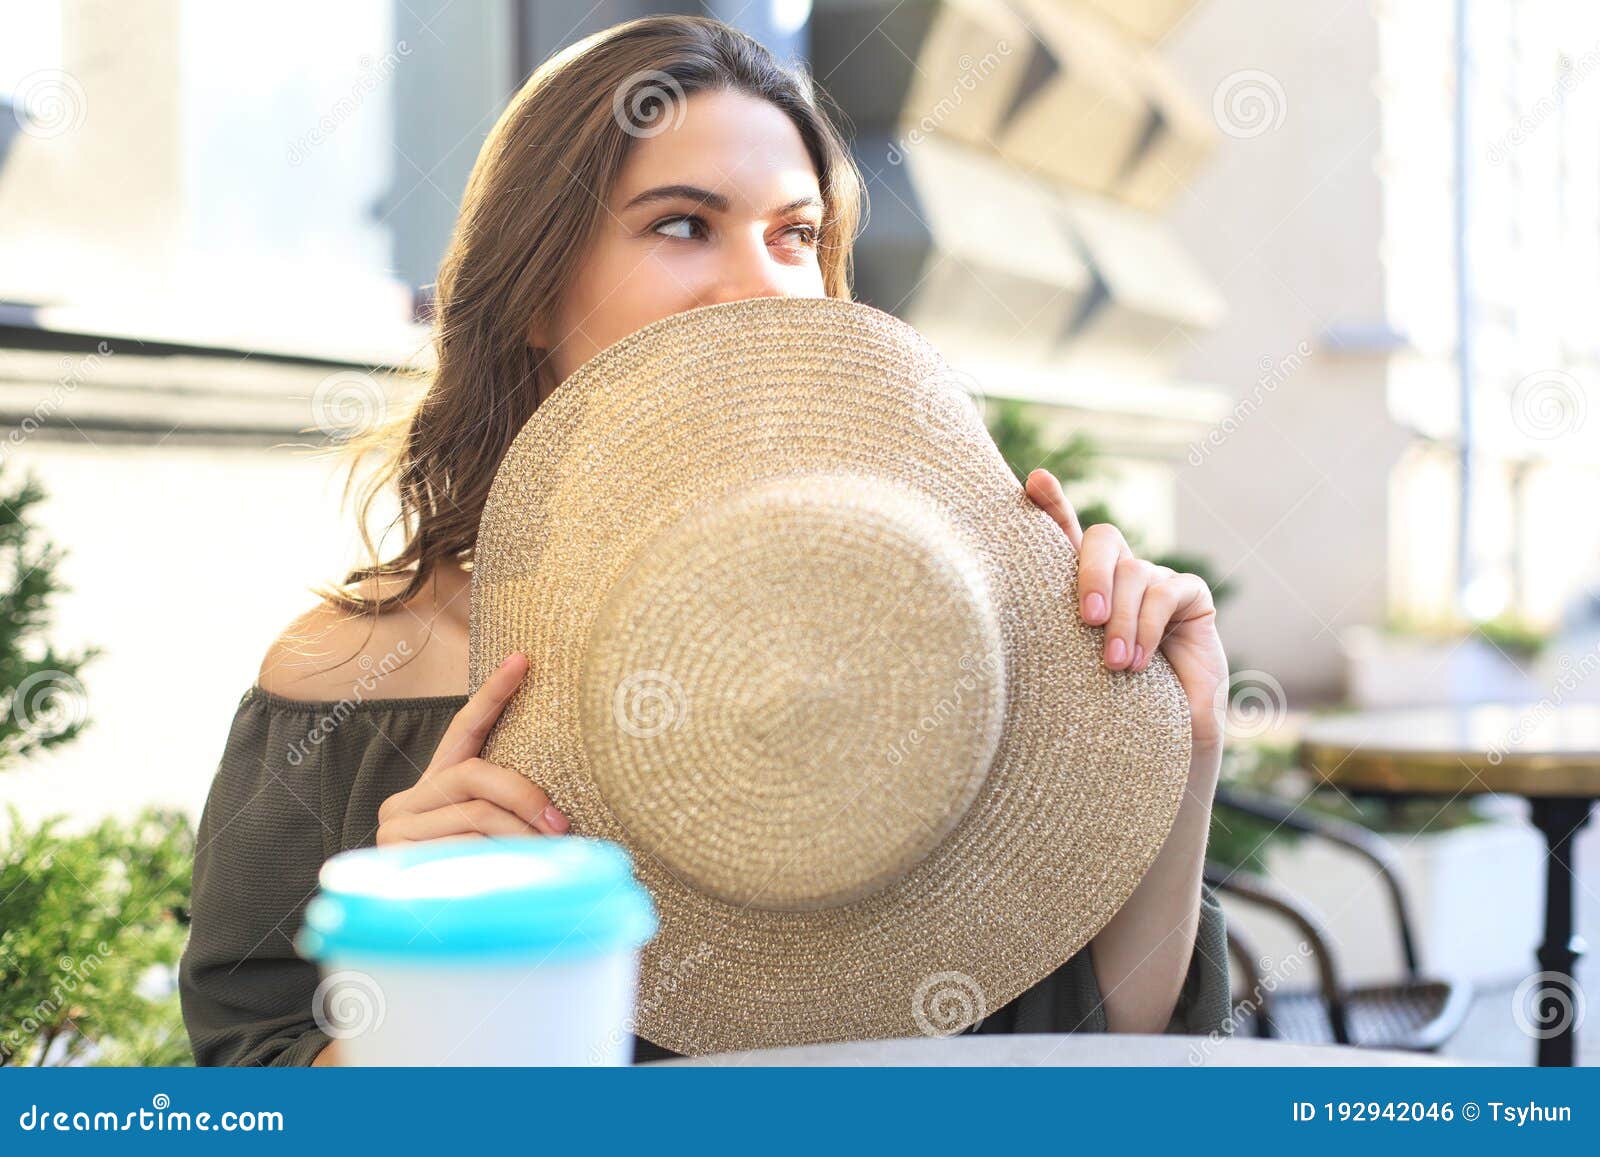 Portrait Of A Girl Hiding Her Face Behind A Straw Hat While Sitting In